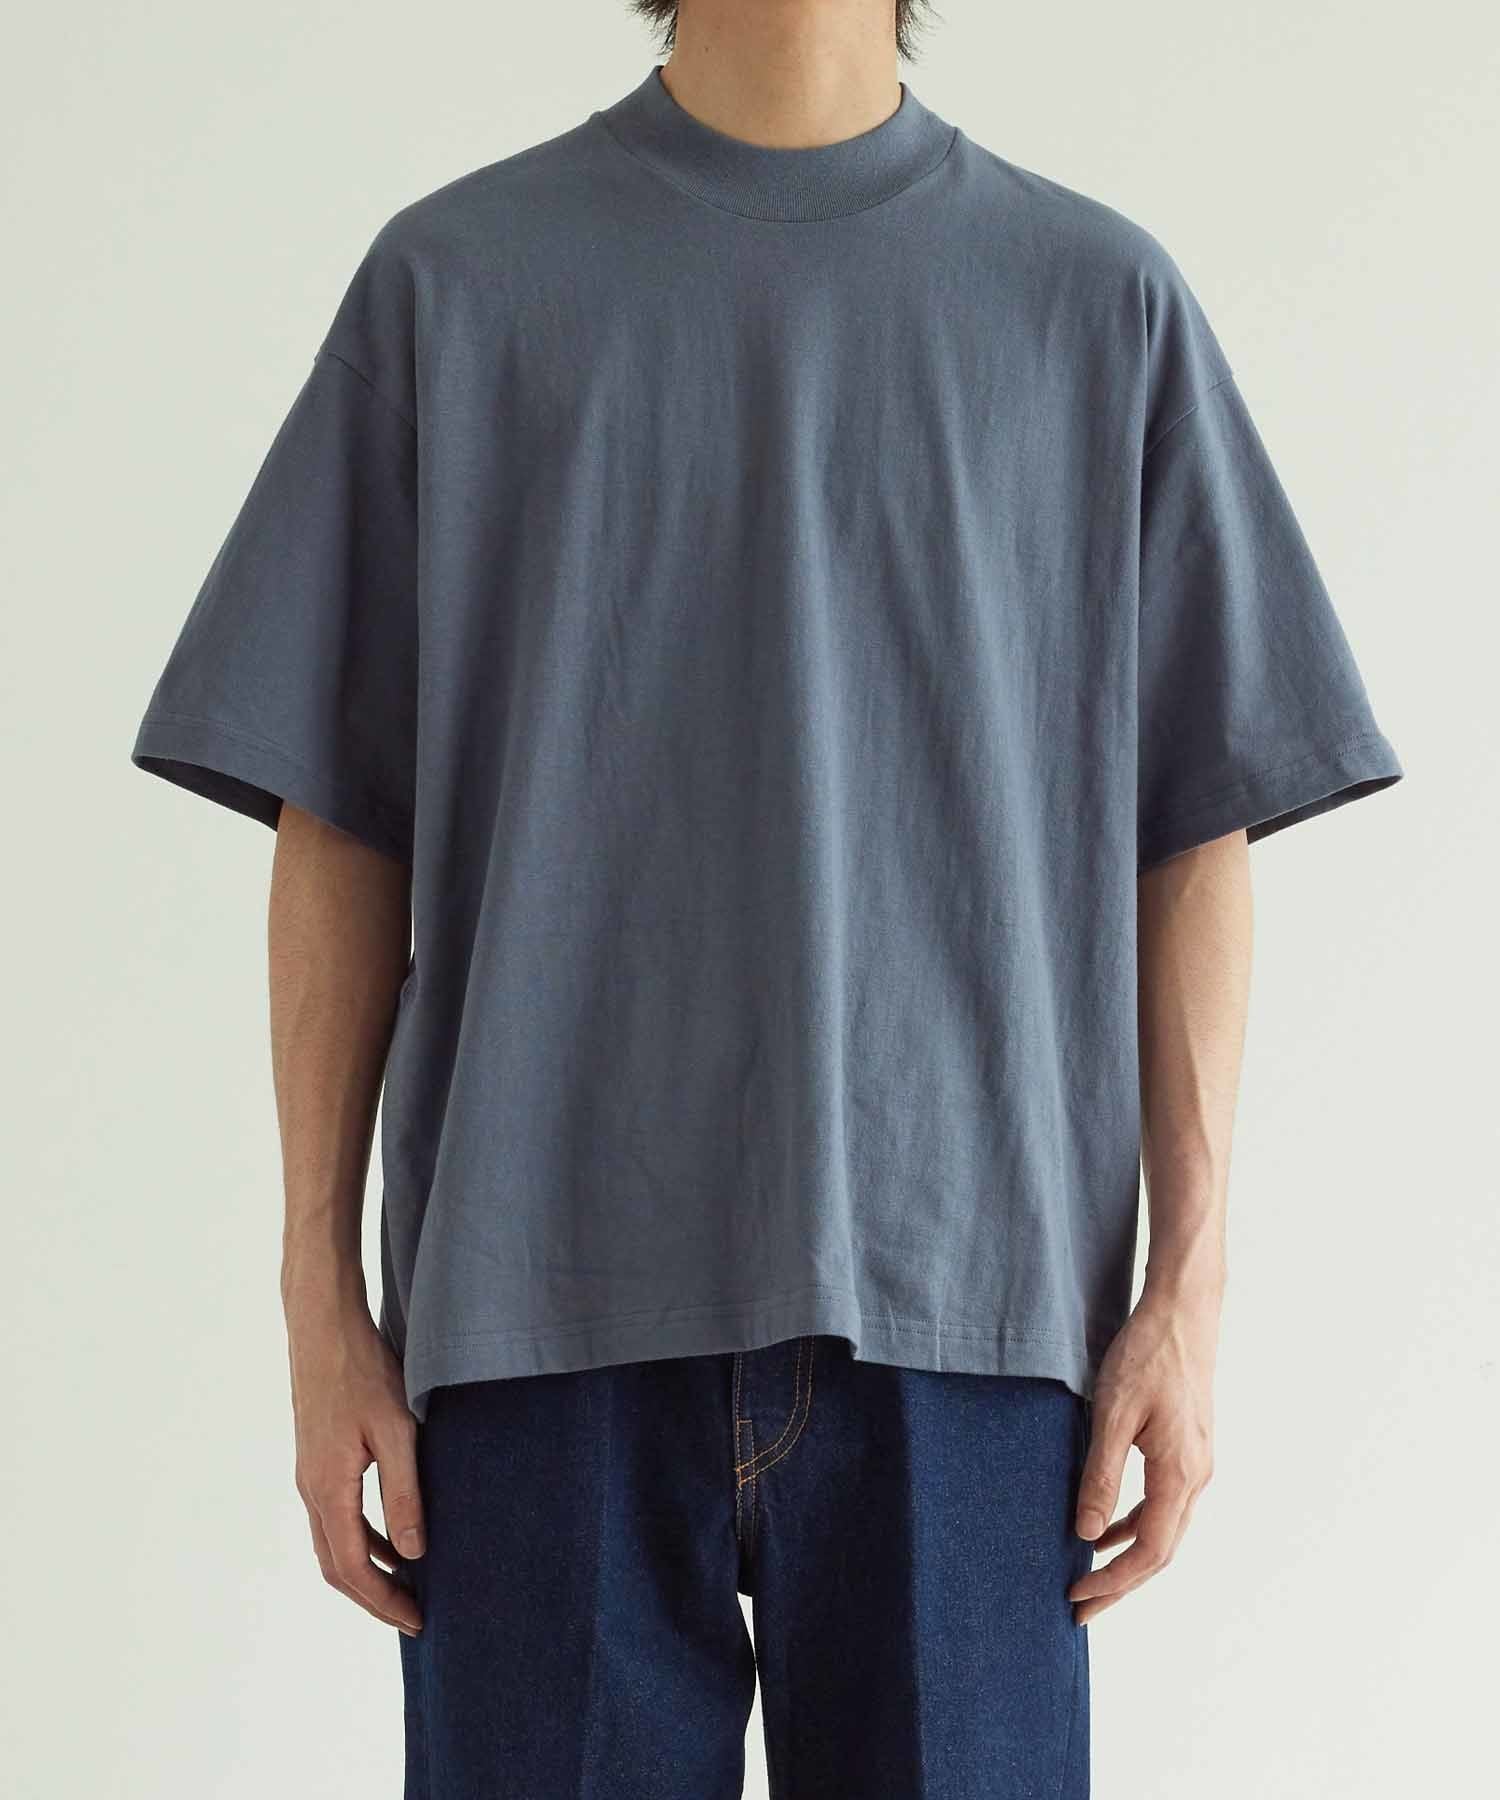 Hanes for BIOTOP】RECYCLE COTTON MOCK NECK T-SHIRTS（2枚パック